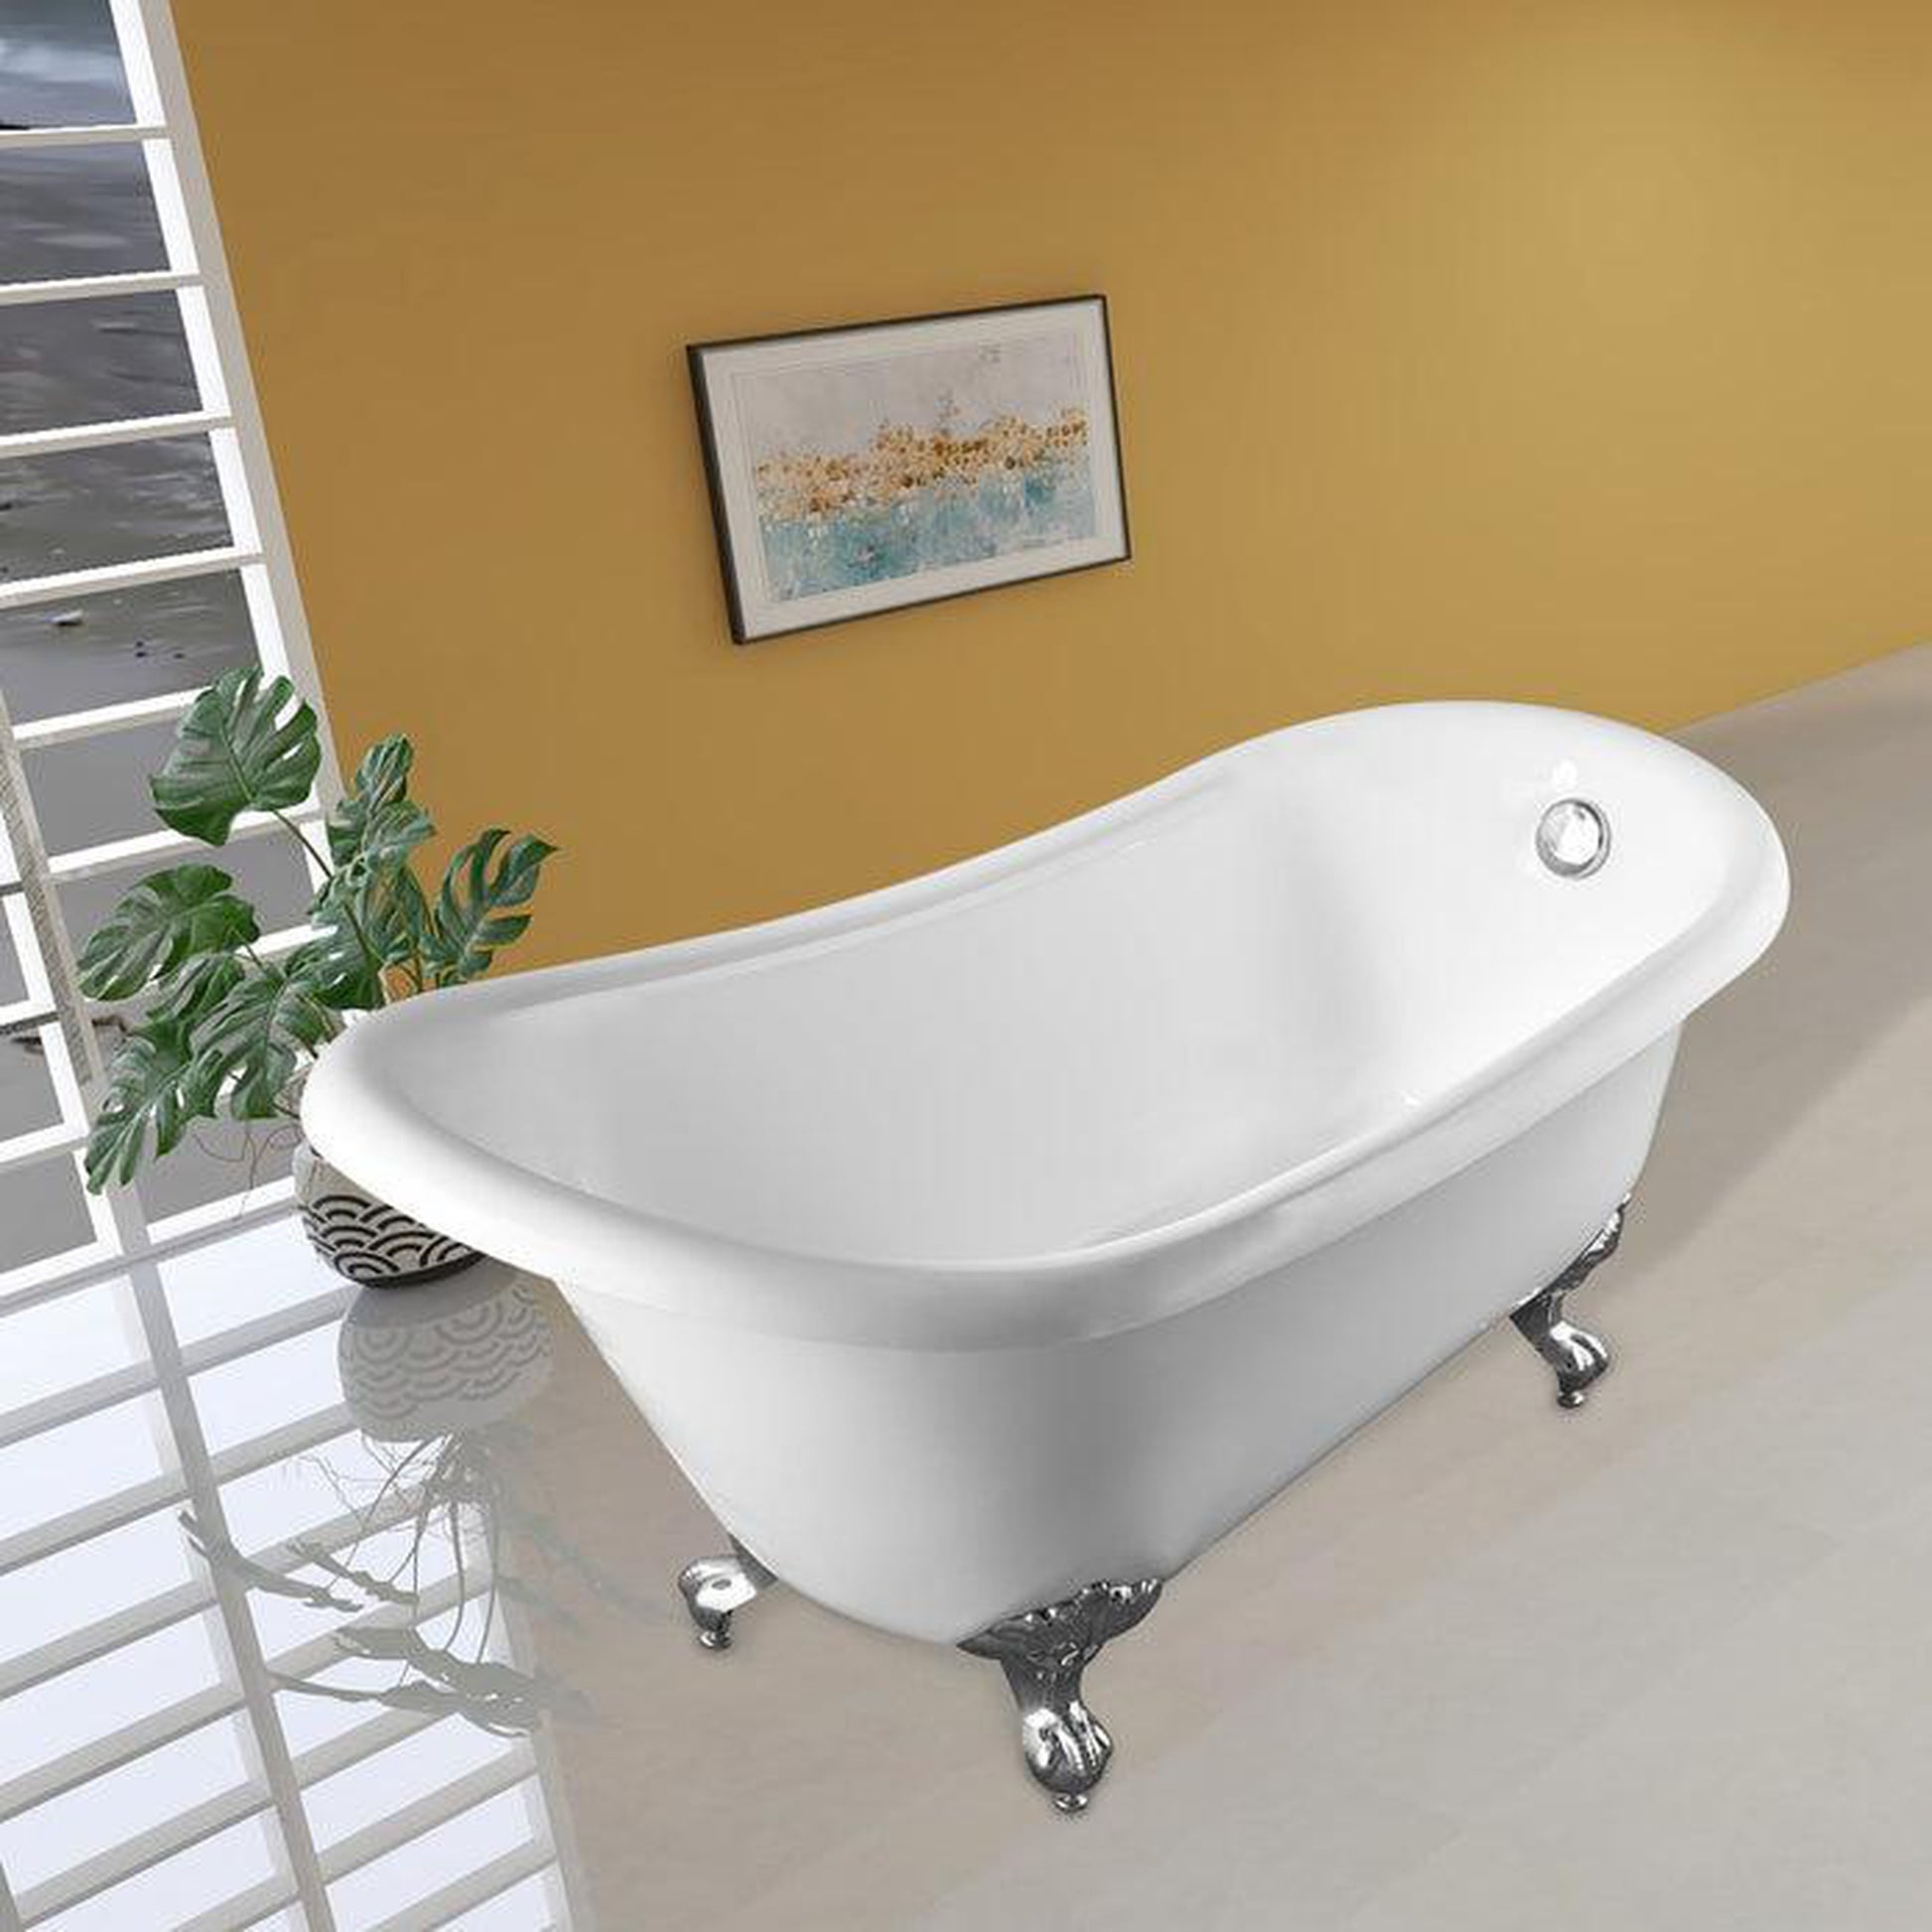 Vanity Art 67" W x 30" H White Acrylic Freestanding Bathtub With Polished Chrome Round Overflow and Pop-up Drain